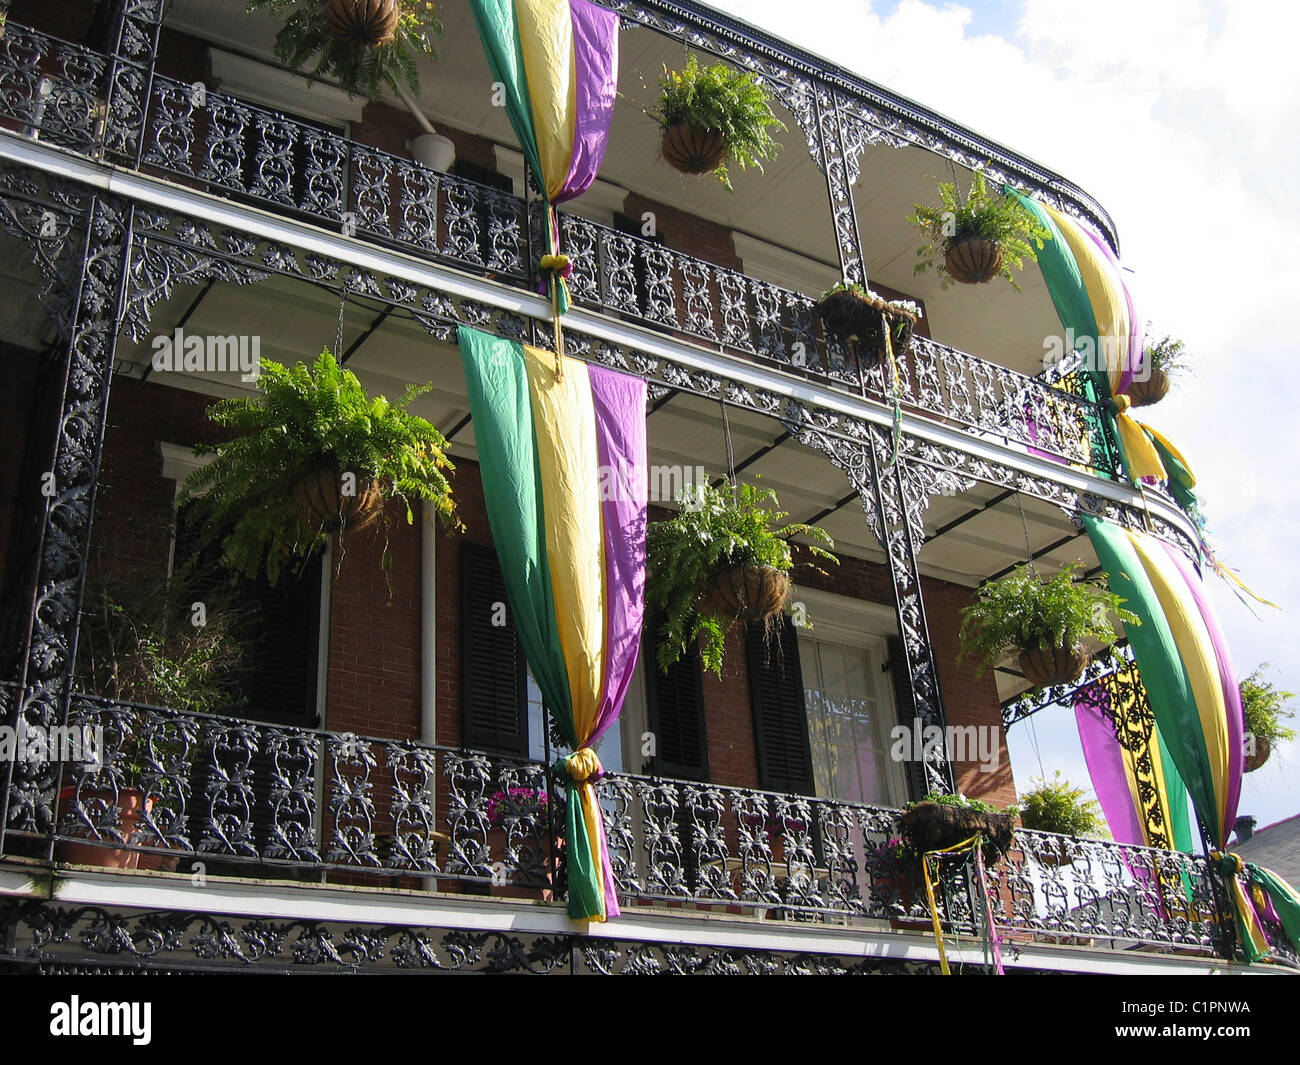 Iron railings decked in coloured ribbons celebrating Mardi Gras, New Orleans, USA. Stock Photo